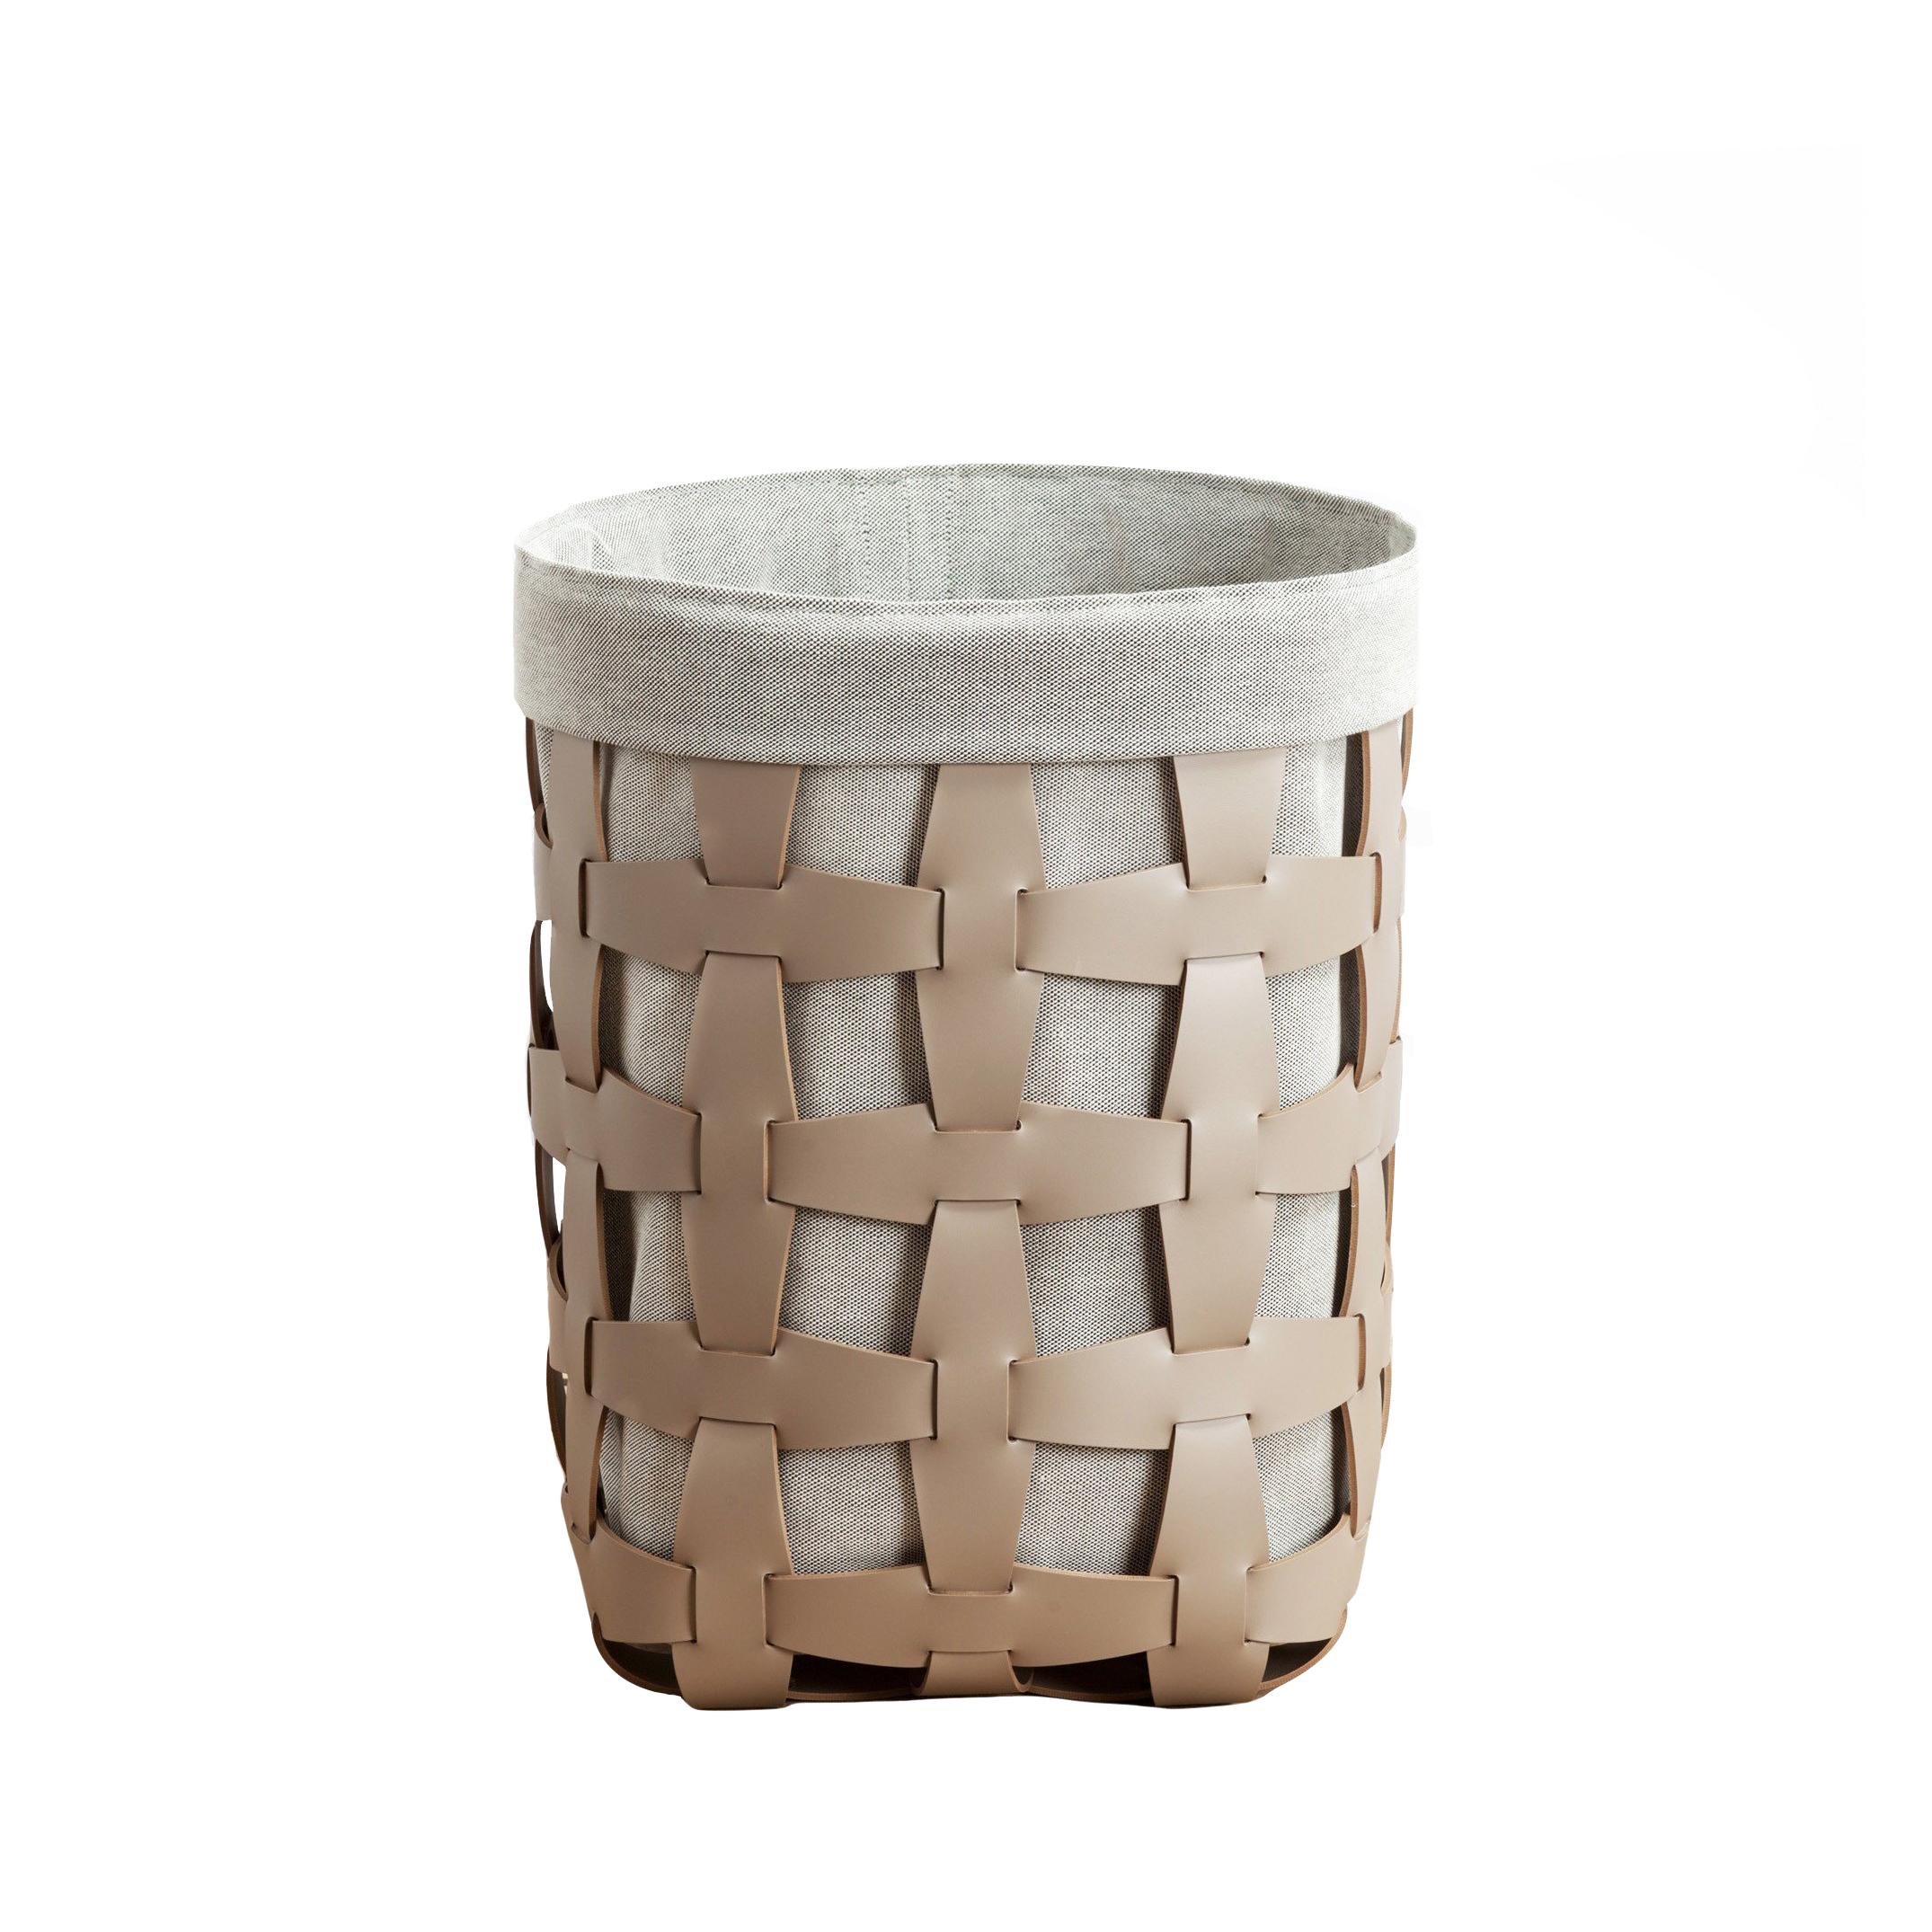 Used for storage or as a laundry and linen hamper, Pinetti's woven taupe leather Hook basket is a contemporary solution for your living space. It is handcrafted in Italy from eco-friendly and water-resistant hide, and has a removable cotton canvas